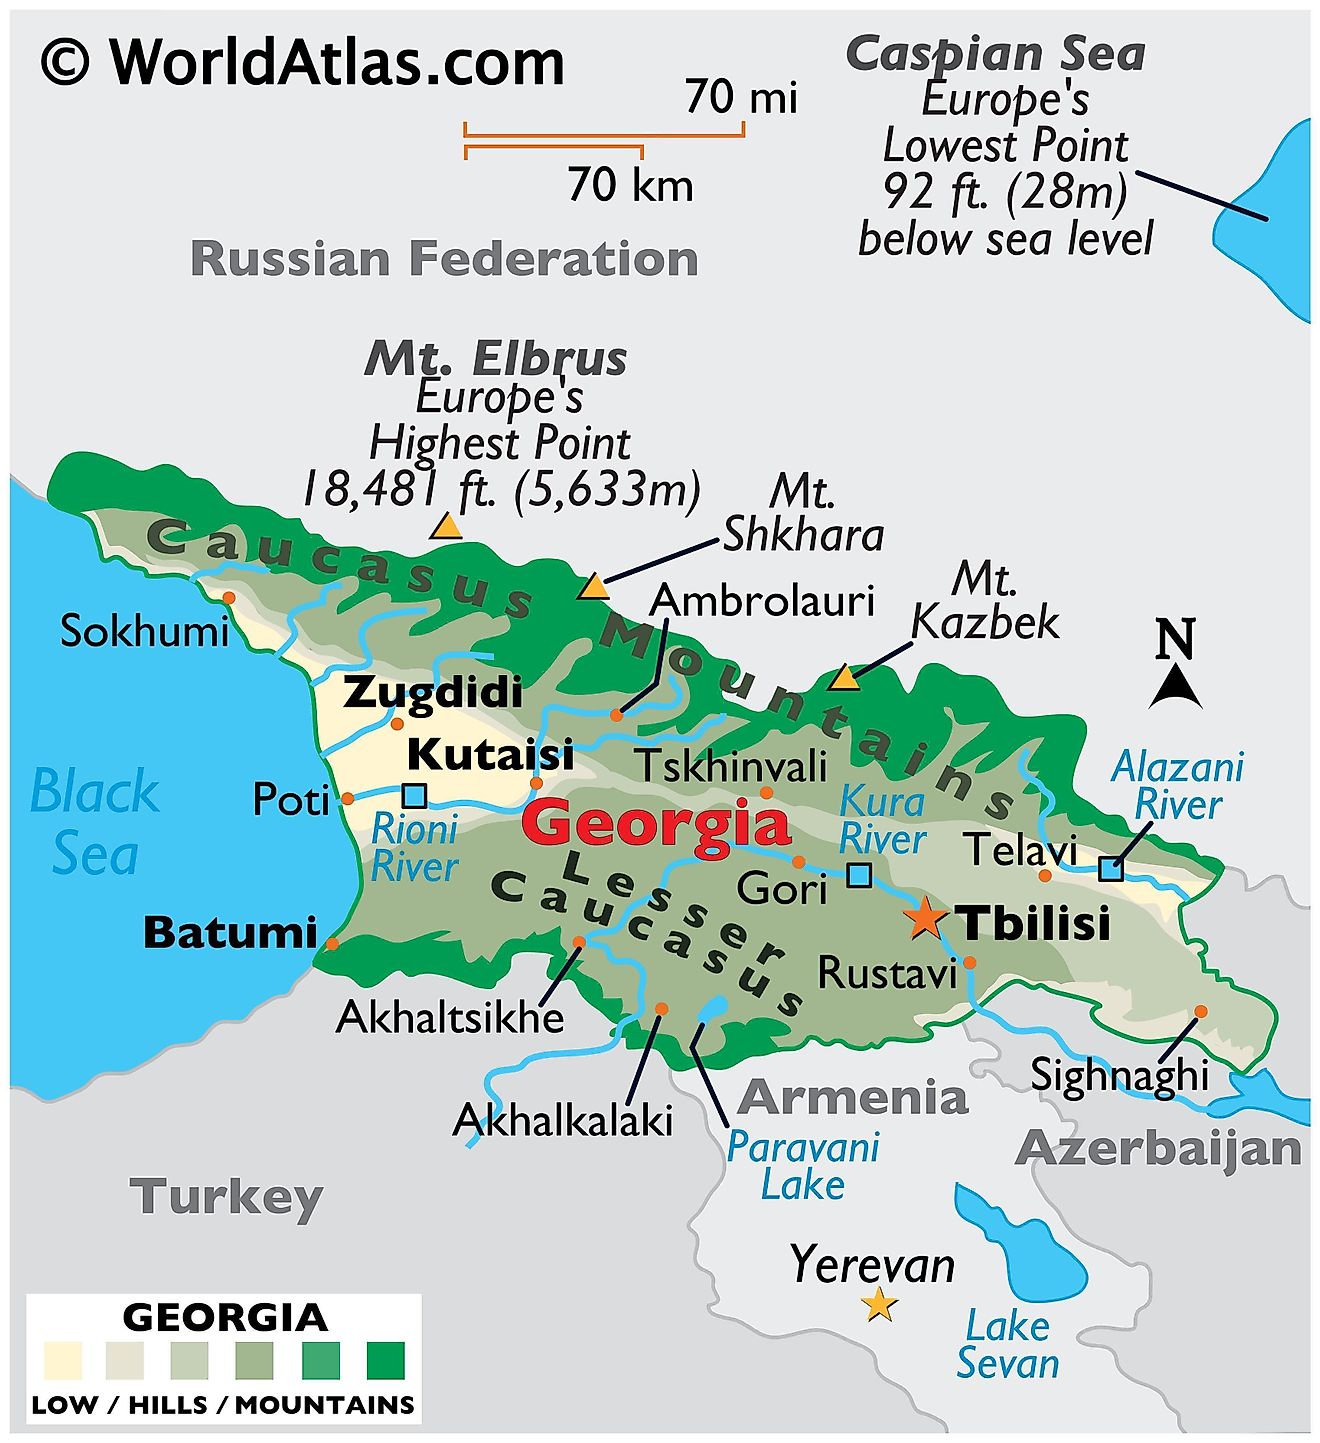 Physical Map of the Georgia showing terrain, mountain ranges, highest peaks, major rivers, important cities, international boundaries, etc.